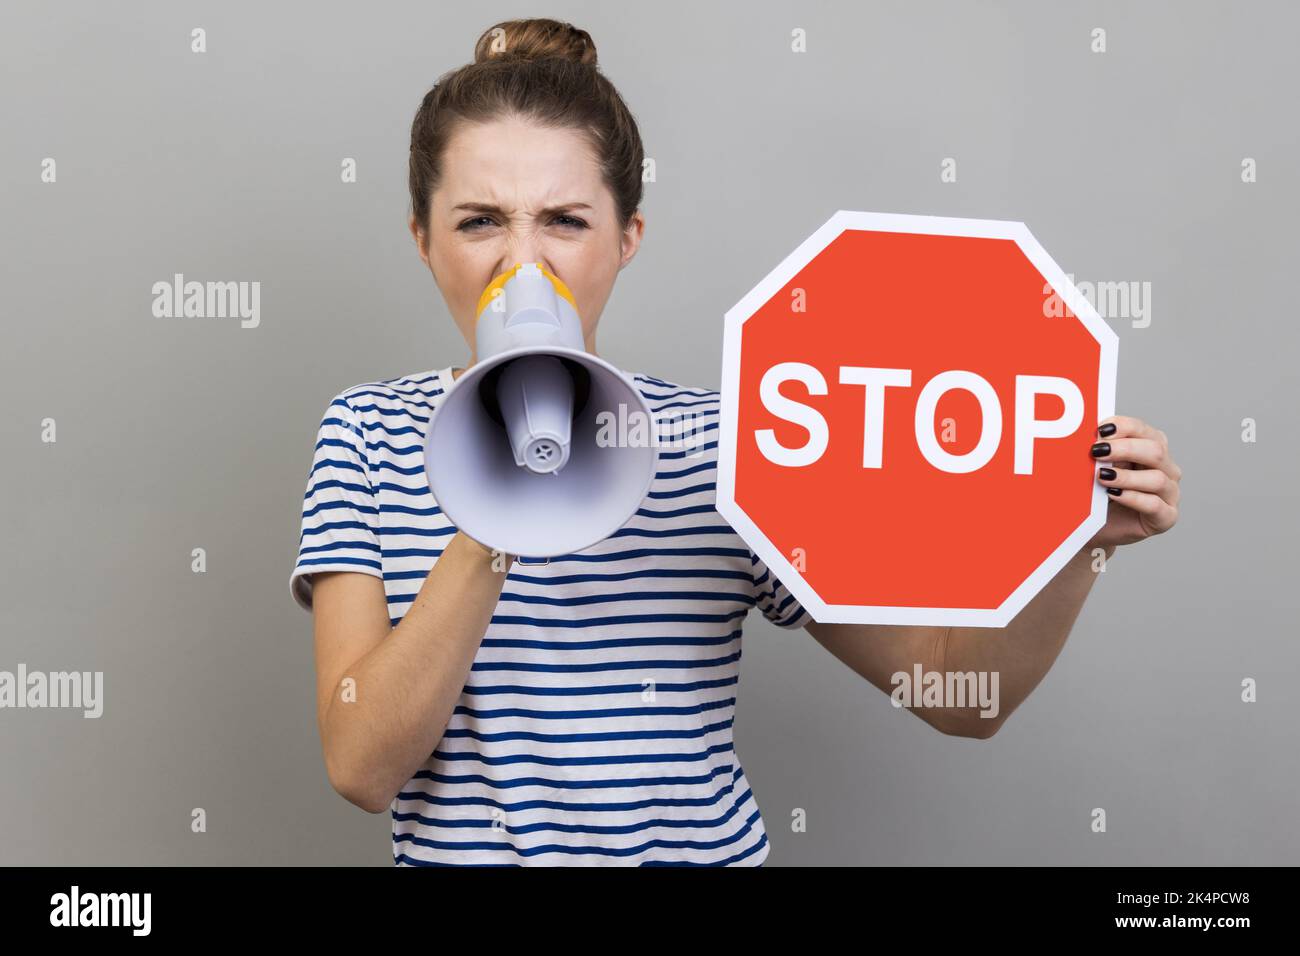 Portrait of excited woman wearing striped T-shirt looking at camera, holding red stop sign and screaming in megaphone in her hands. Indoor studio shot isolated on gray background. Stock Photo